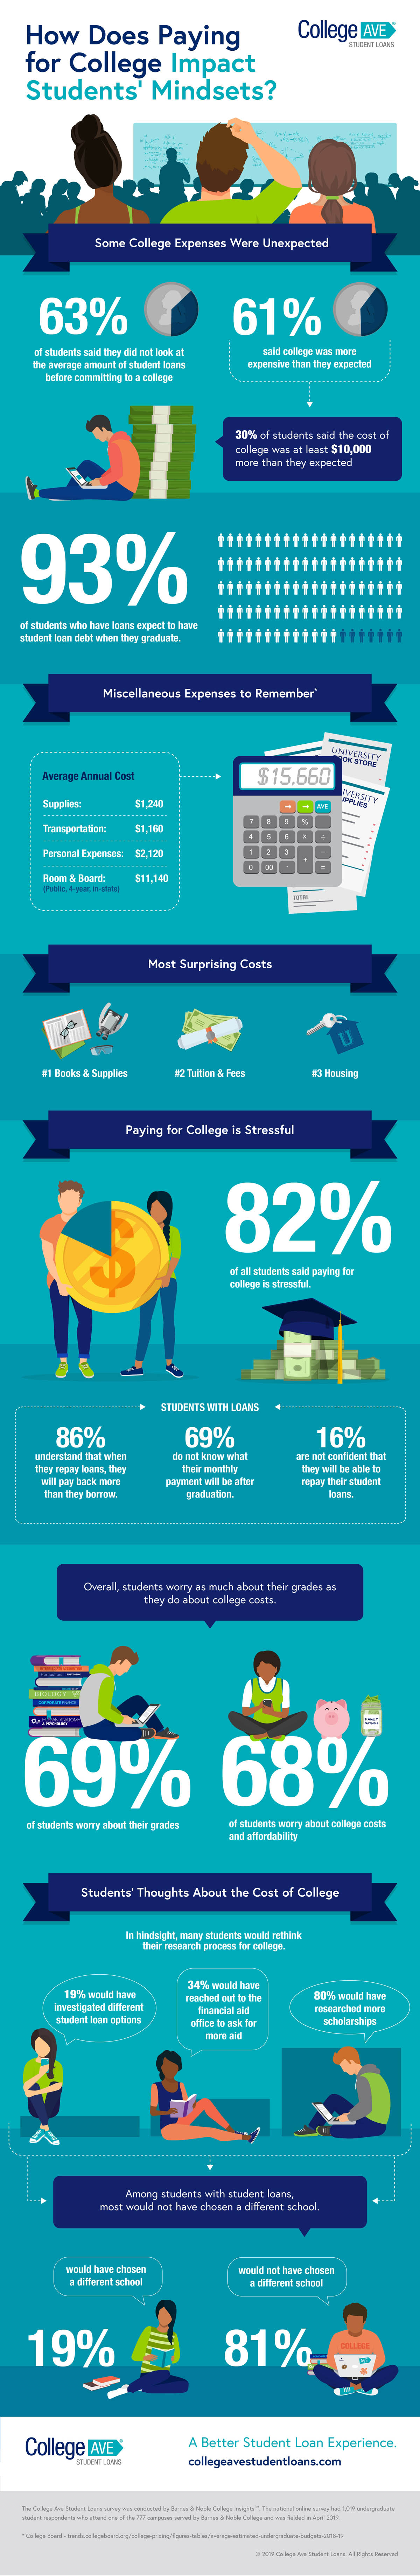 How Does Paying for College Impact Students’ Mindsets